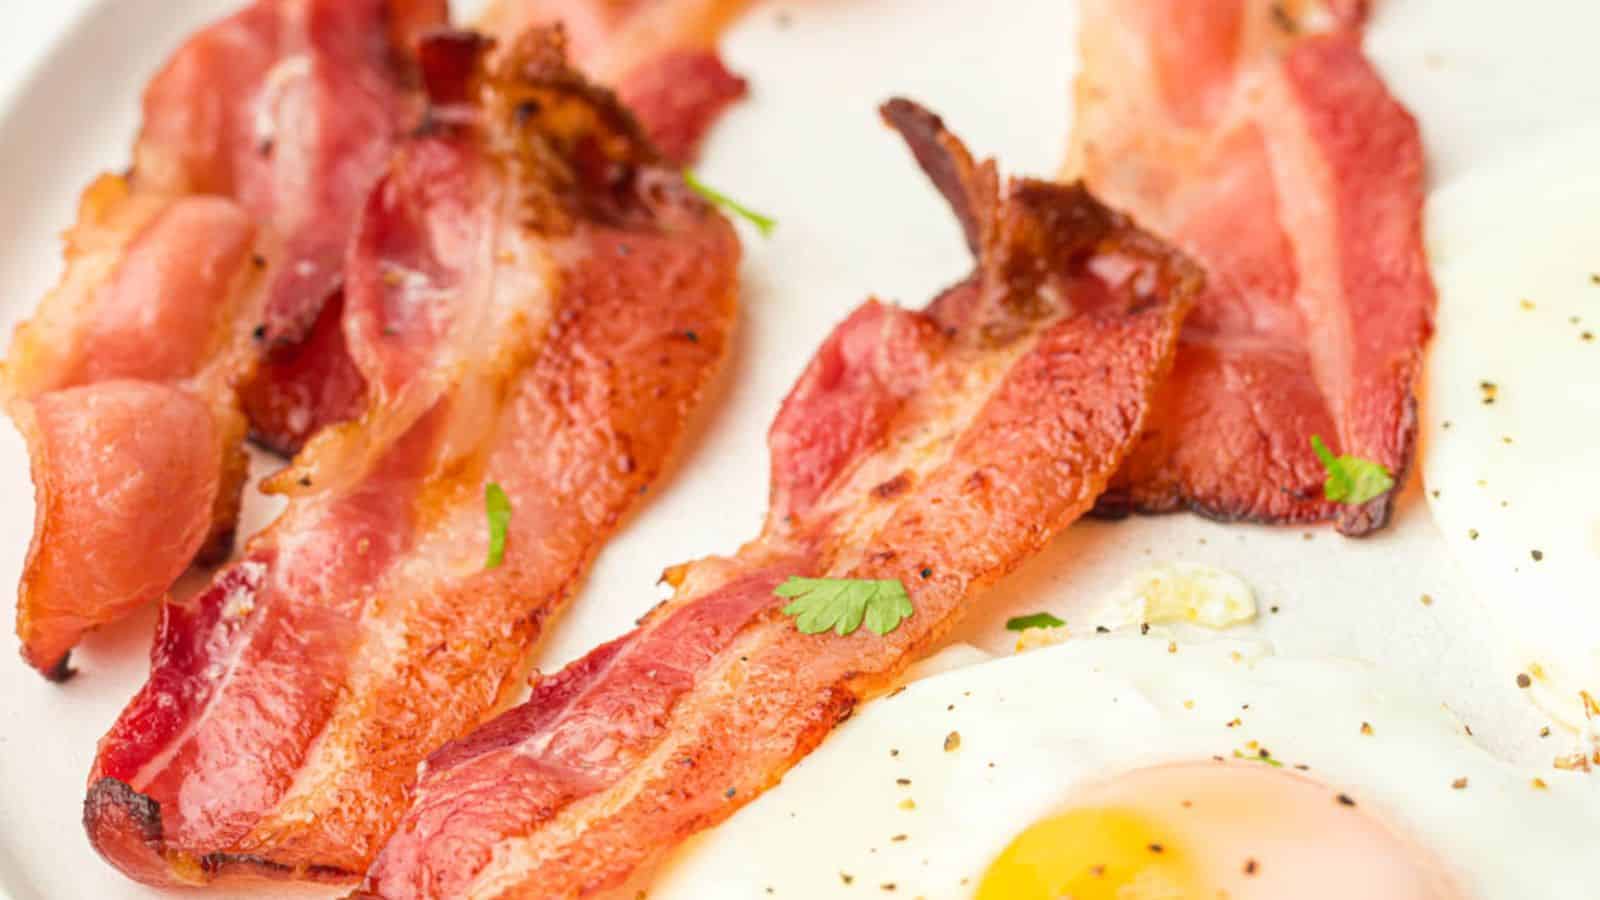 Close-up view of cooked bacon strips and fried eggs on a white plate, garnished with parsley.